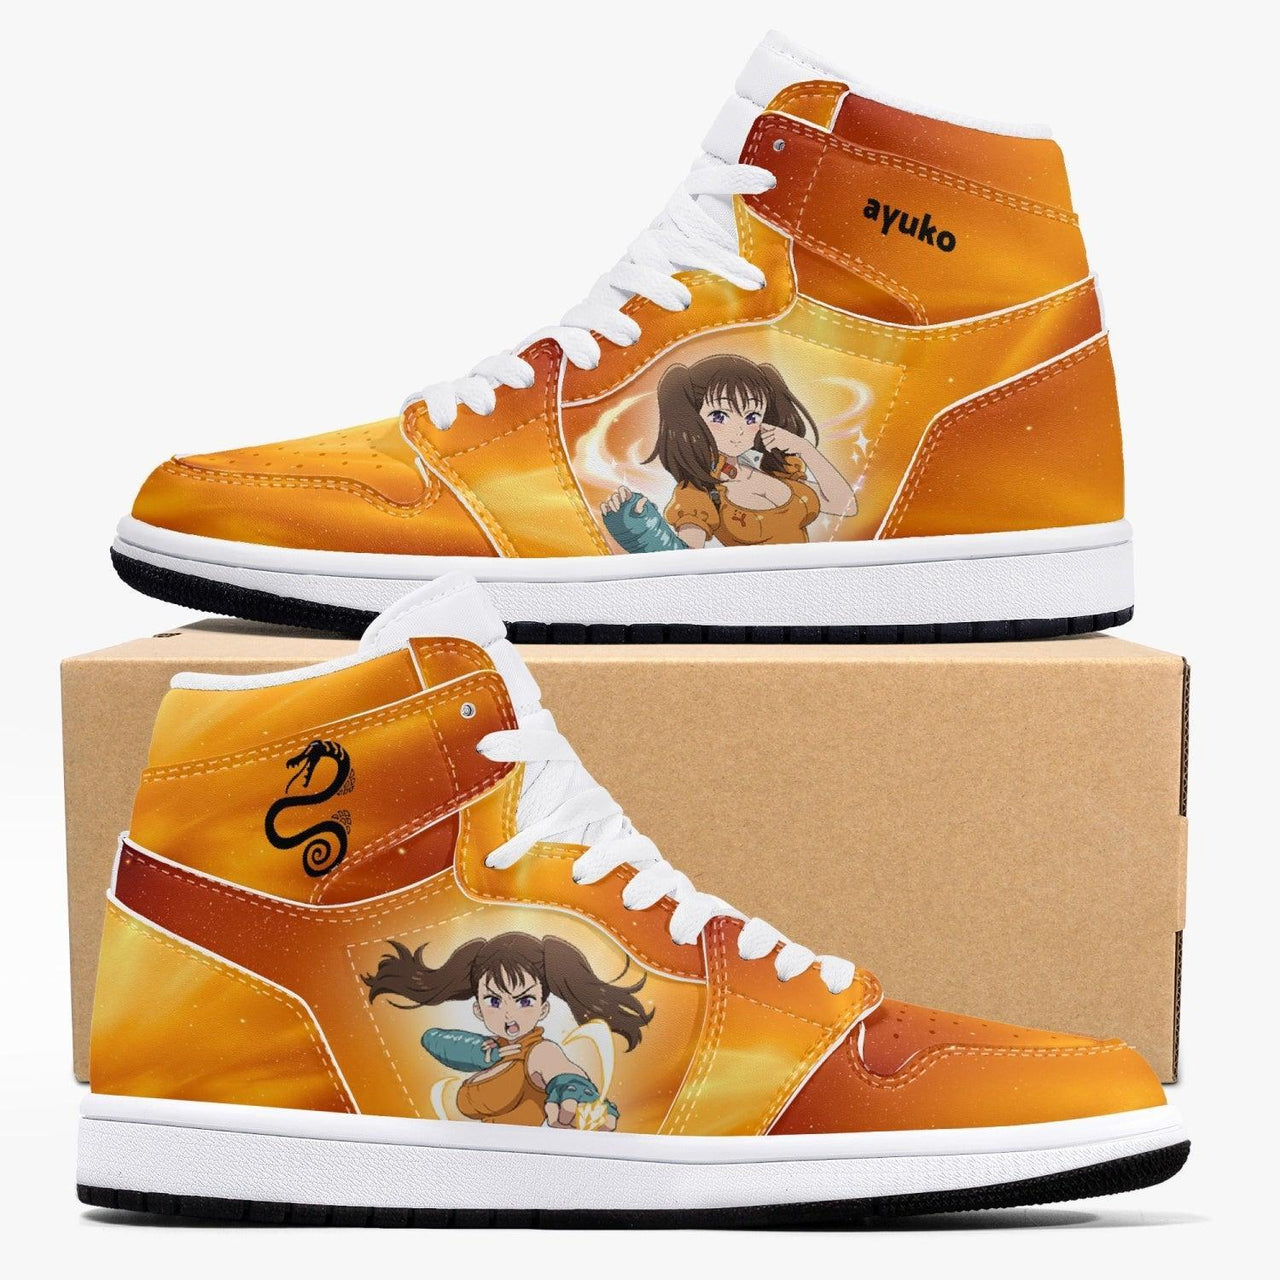 Seven Deadly Sins Diane Sin Of Envy Air JD1 Mid Anime Shoes _ Seven Deadly Sins _ Ayuko